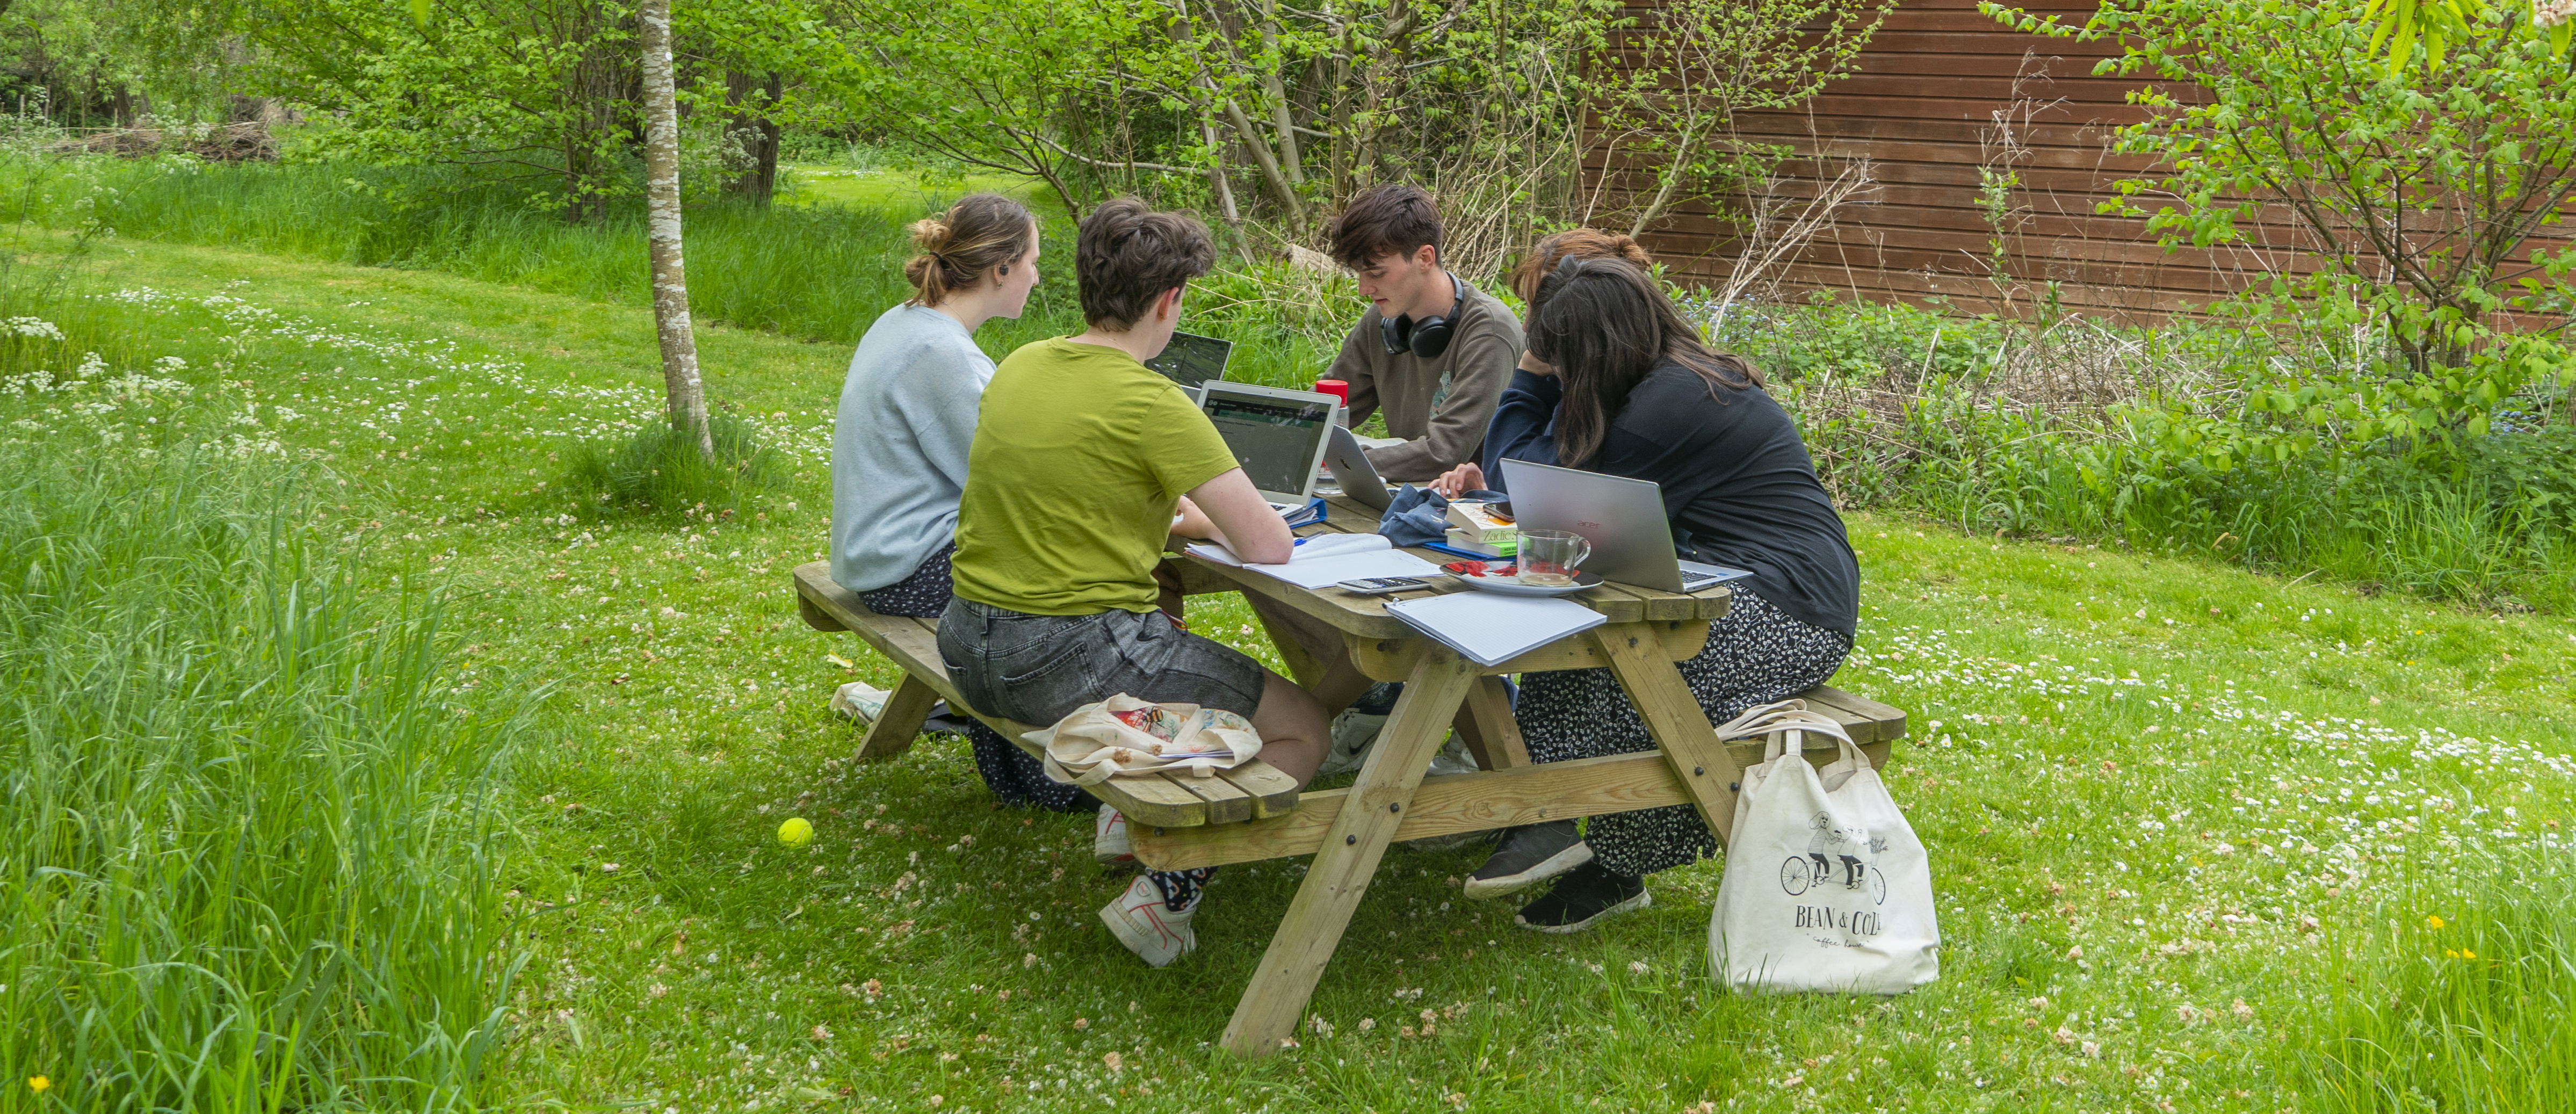 Students studying in the gardens at LMH